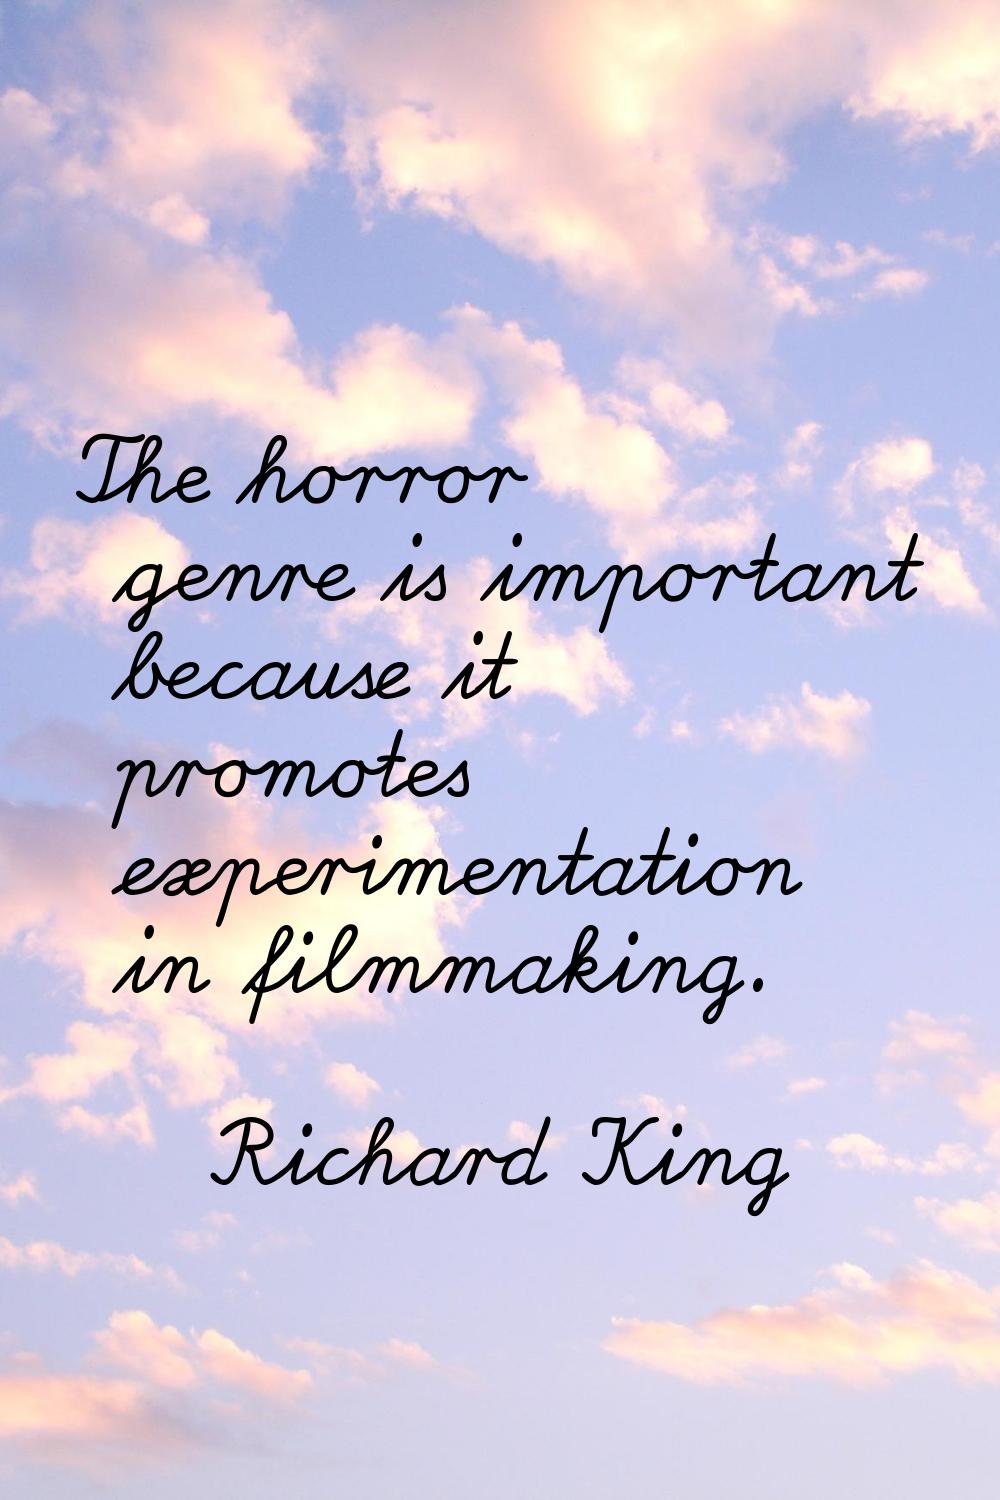 The horror genre is important because it promotes experimentation in filmmaking.